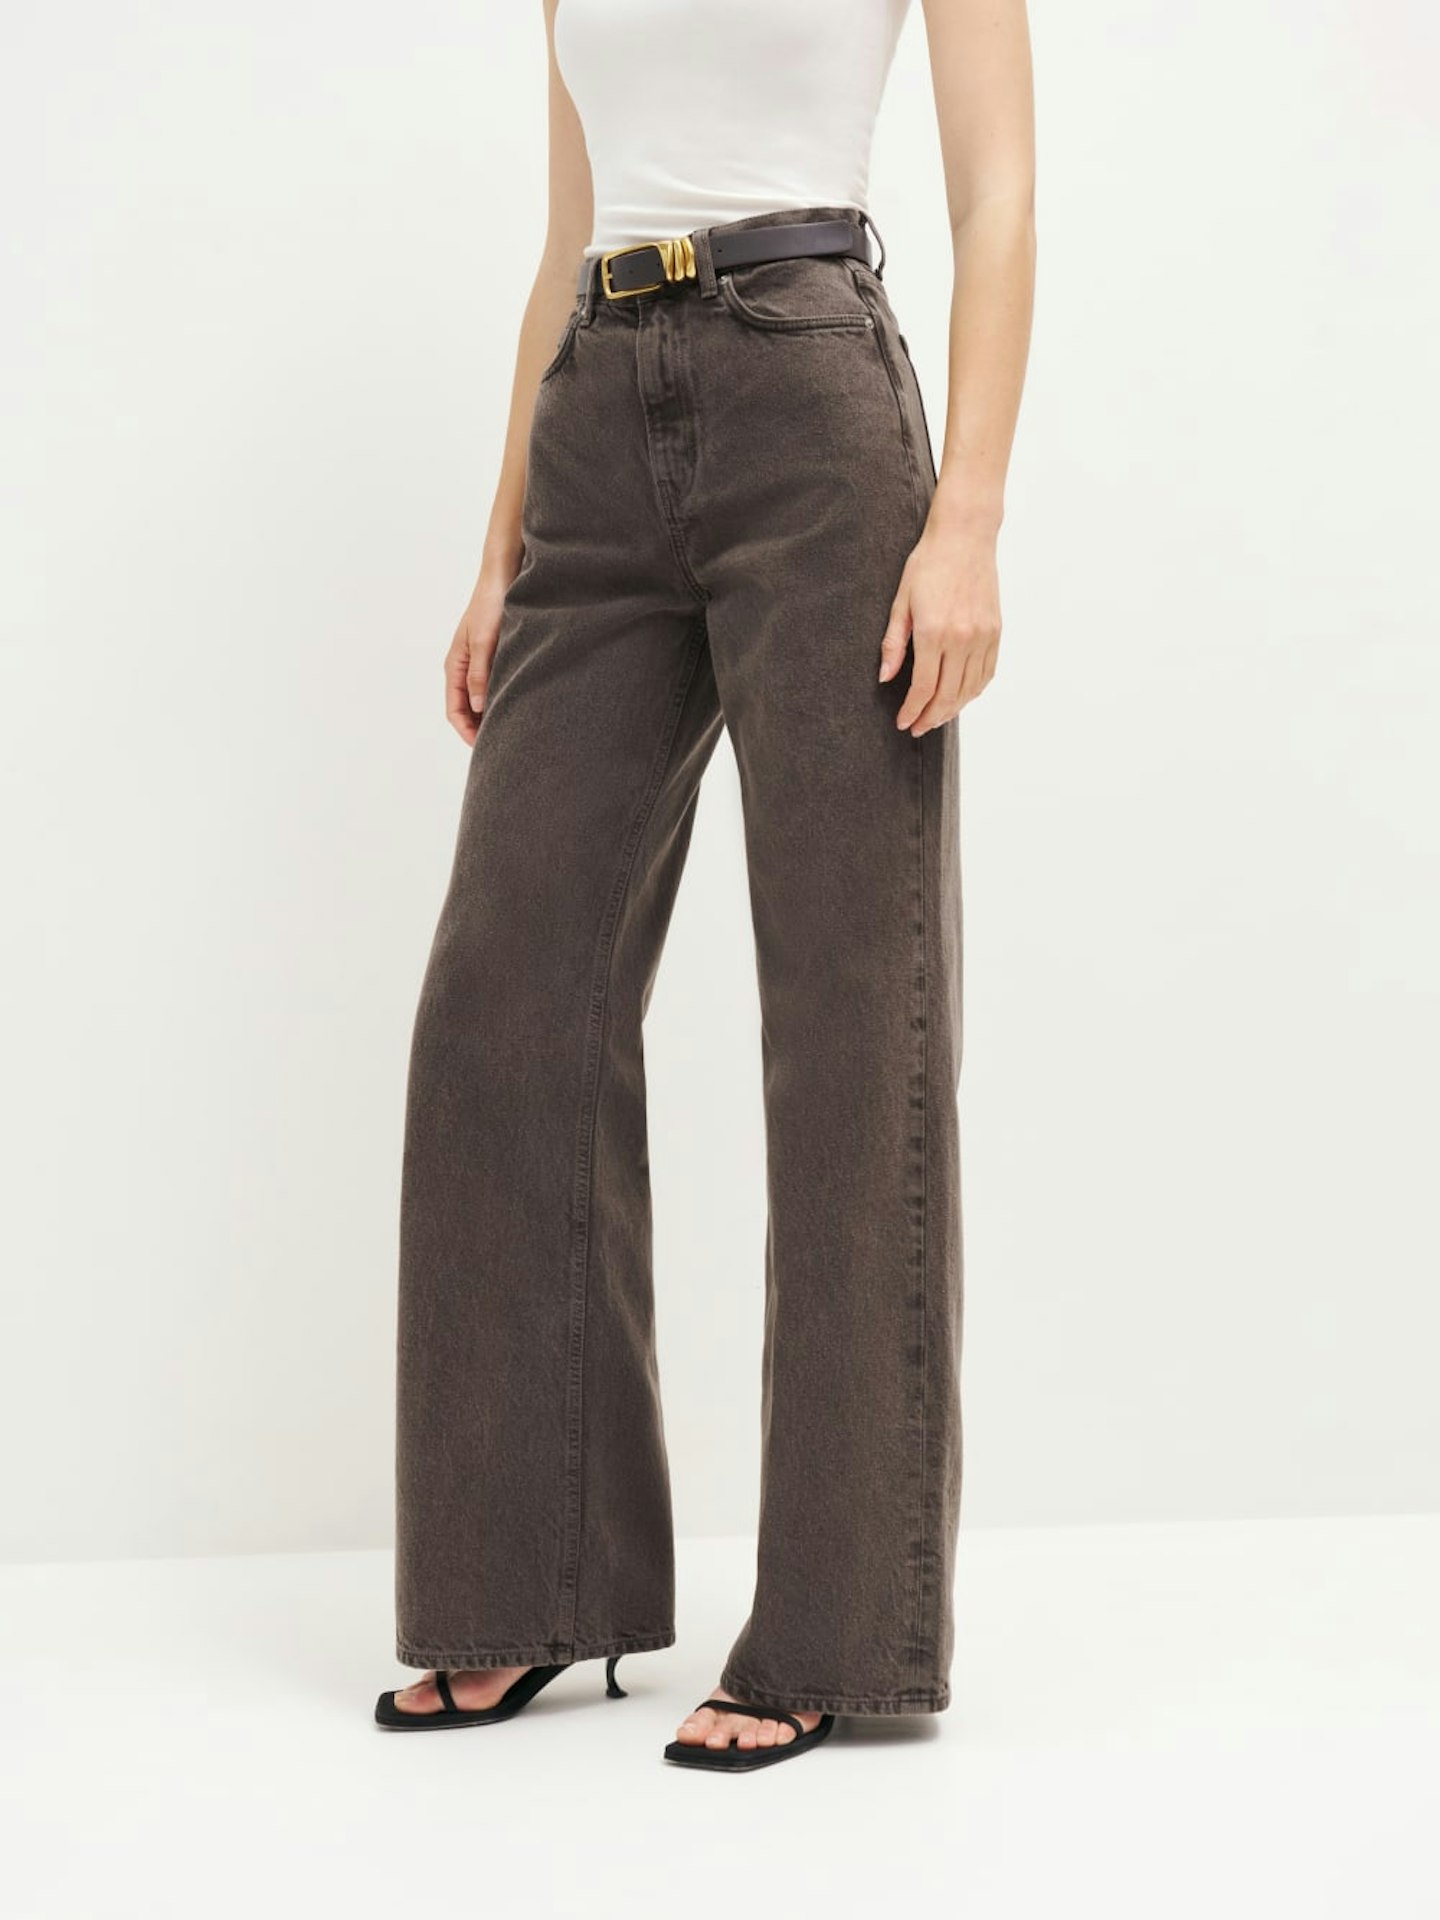 Reformation, Cary High Rise Slouchy Wide Leg Jeans